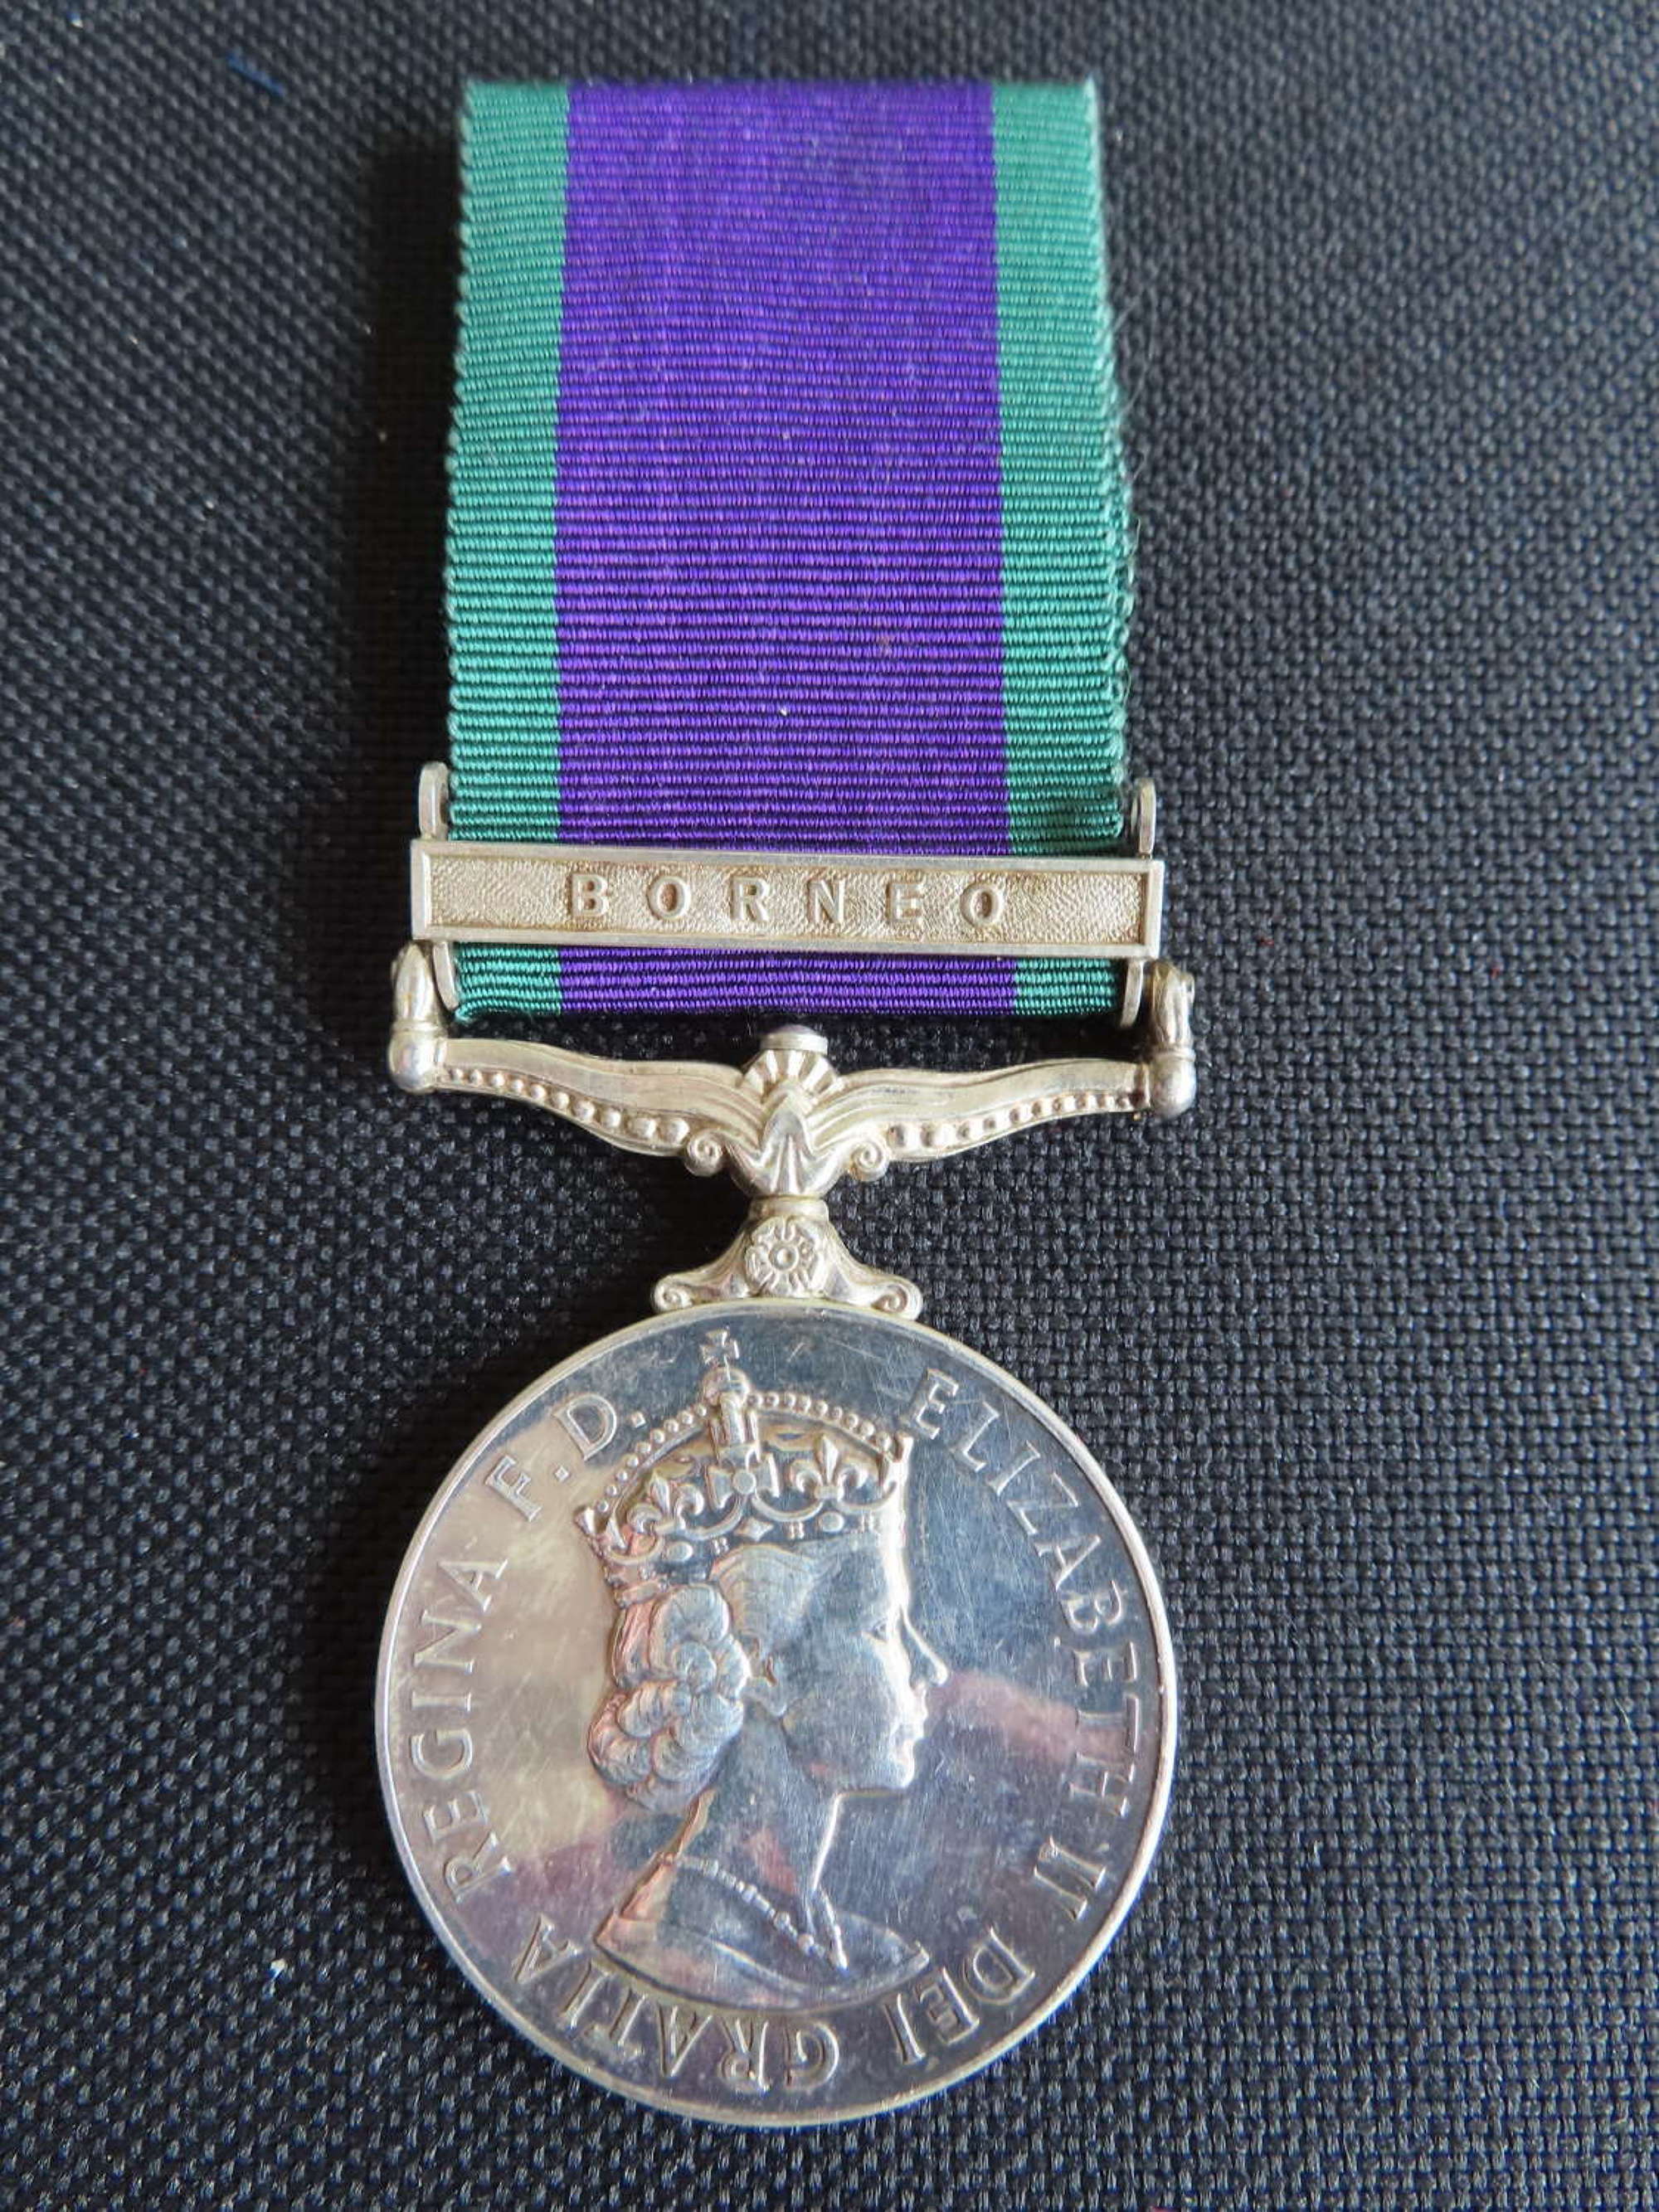 Borneo campaign service medal awarded to Spr Moffat Royal Engineers